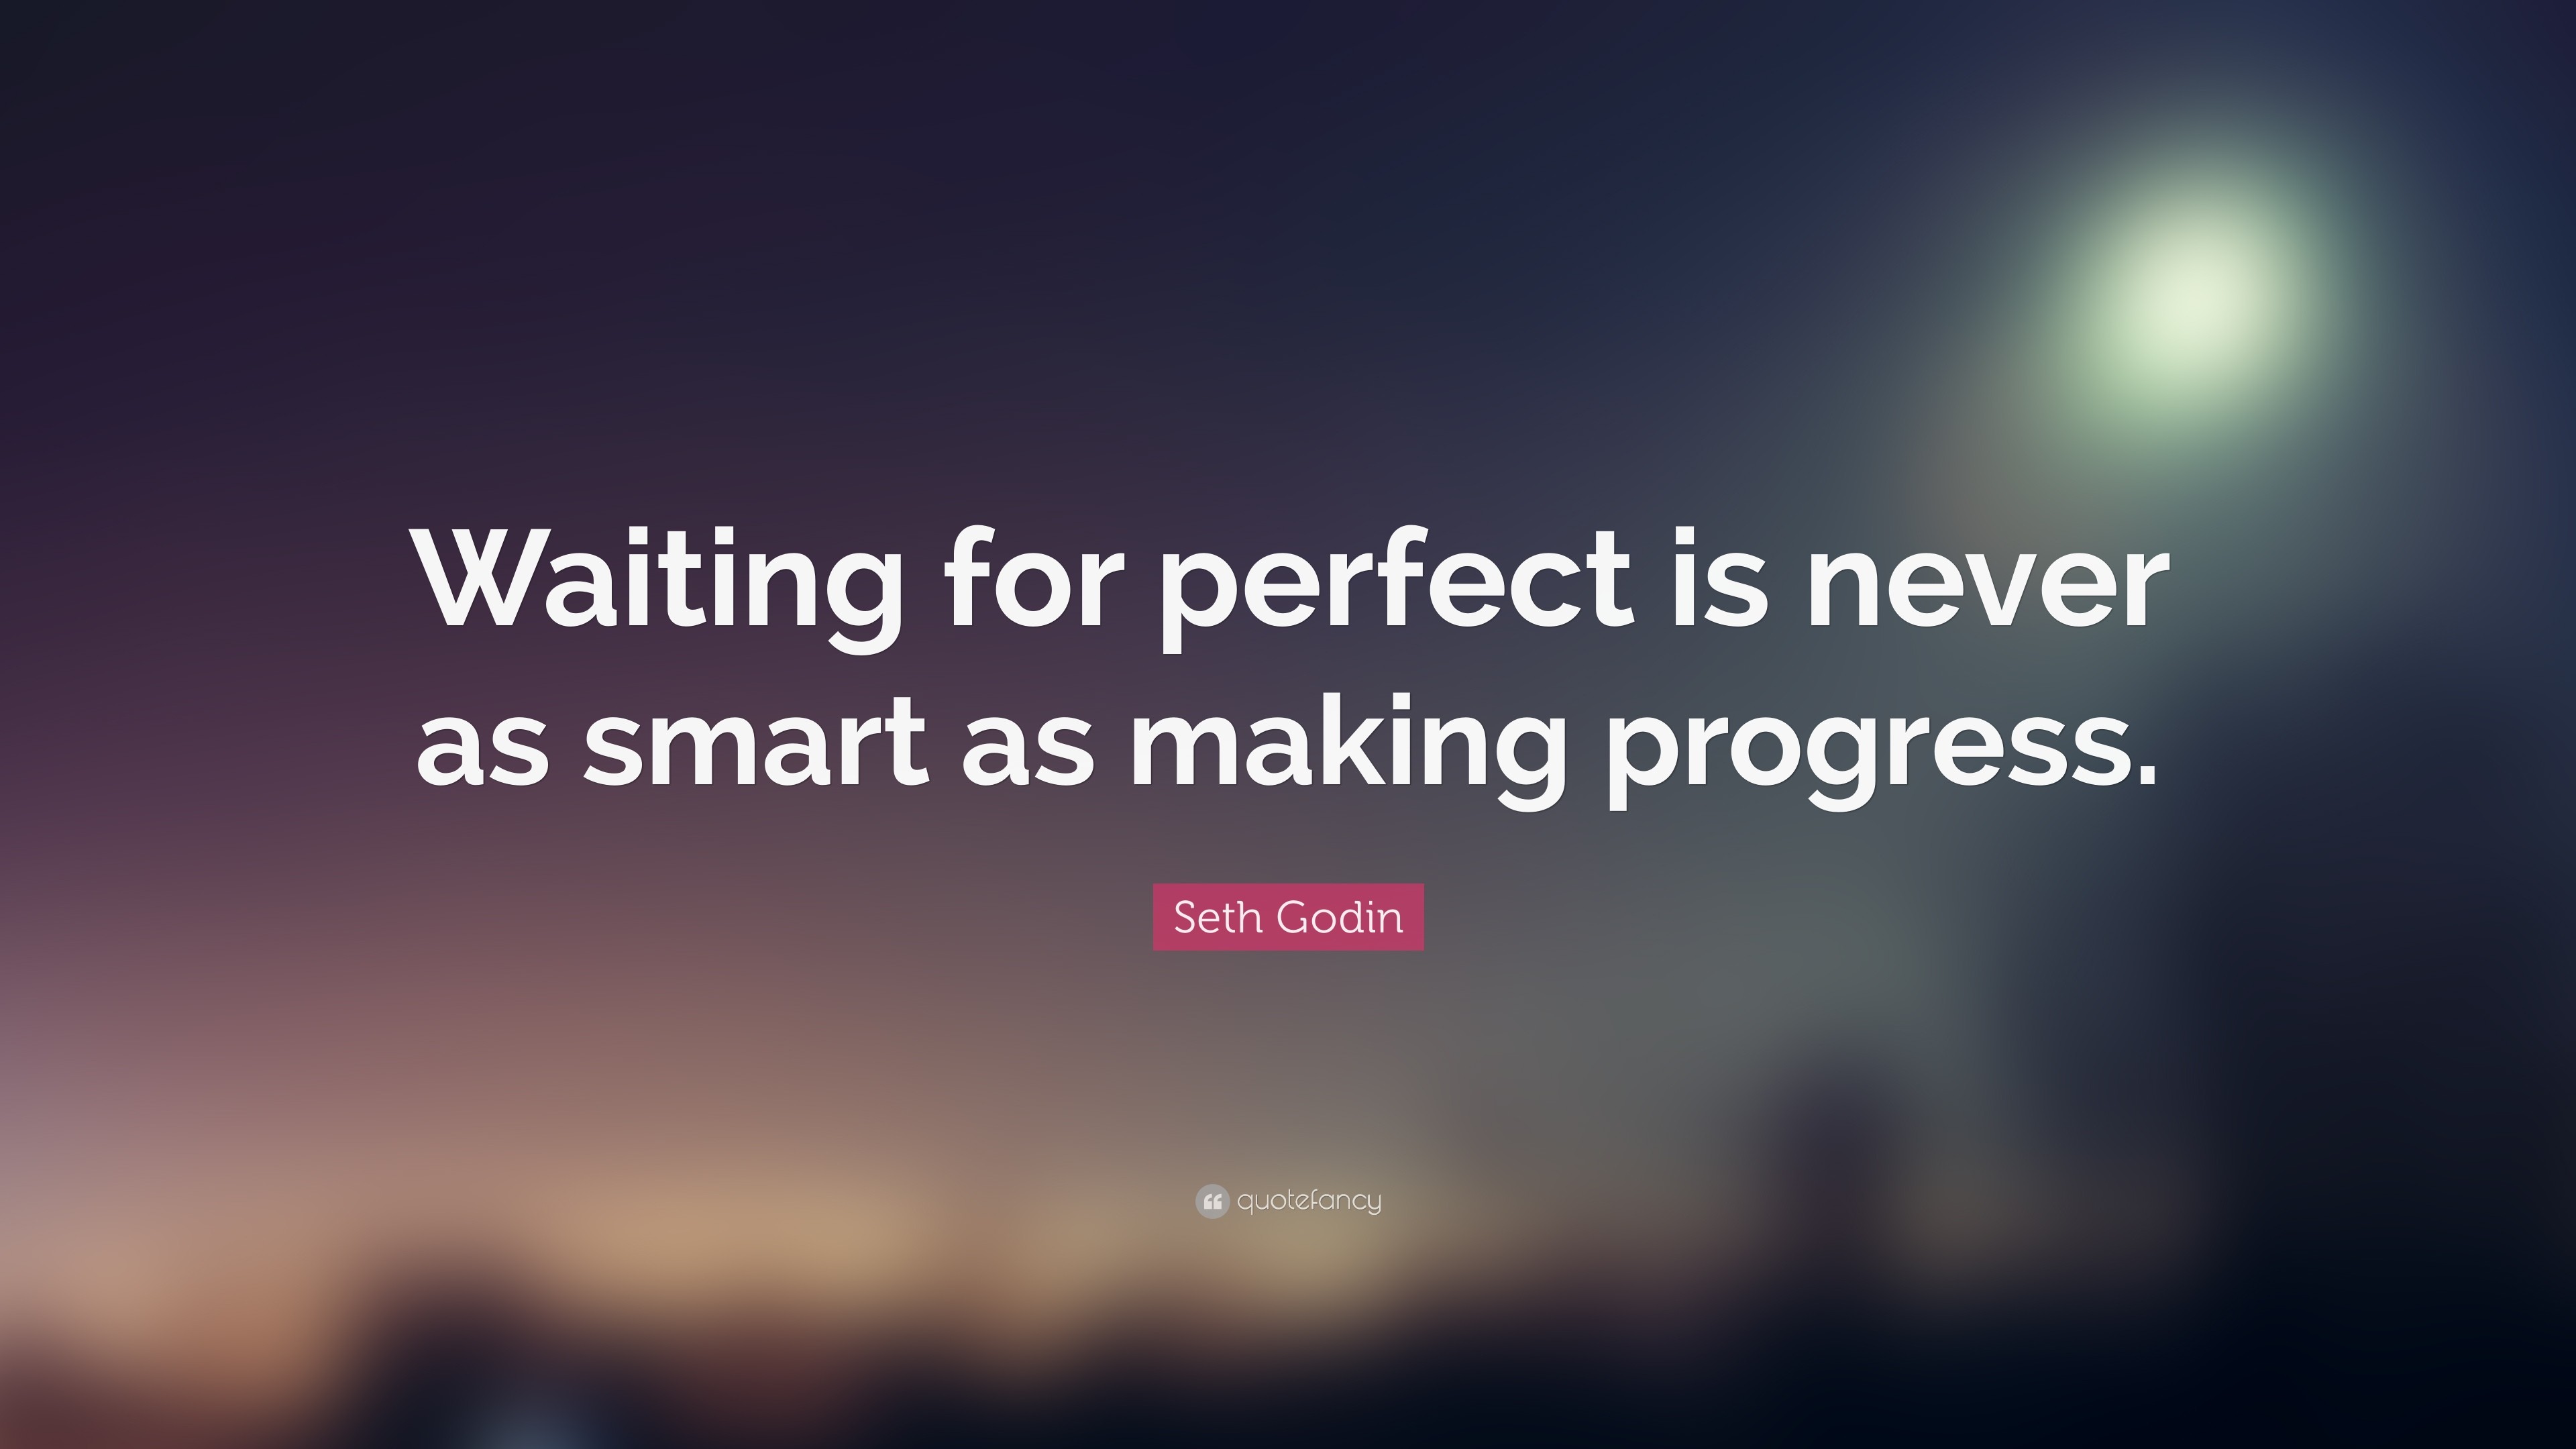 3840x2160 Seth Godin Quote: “Waiting for perfect is never as smart as making progress.